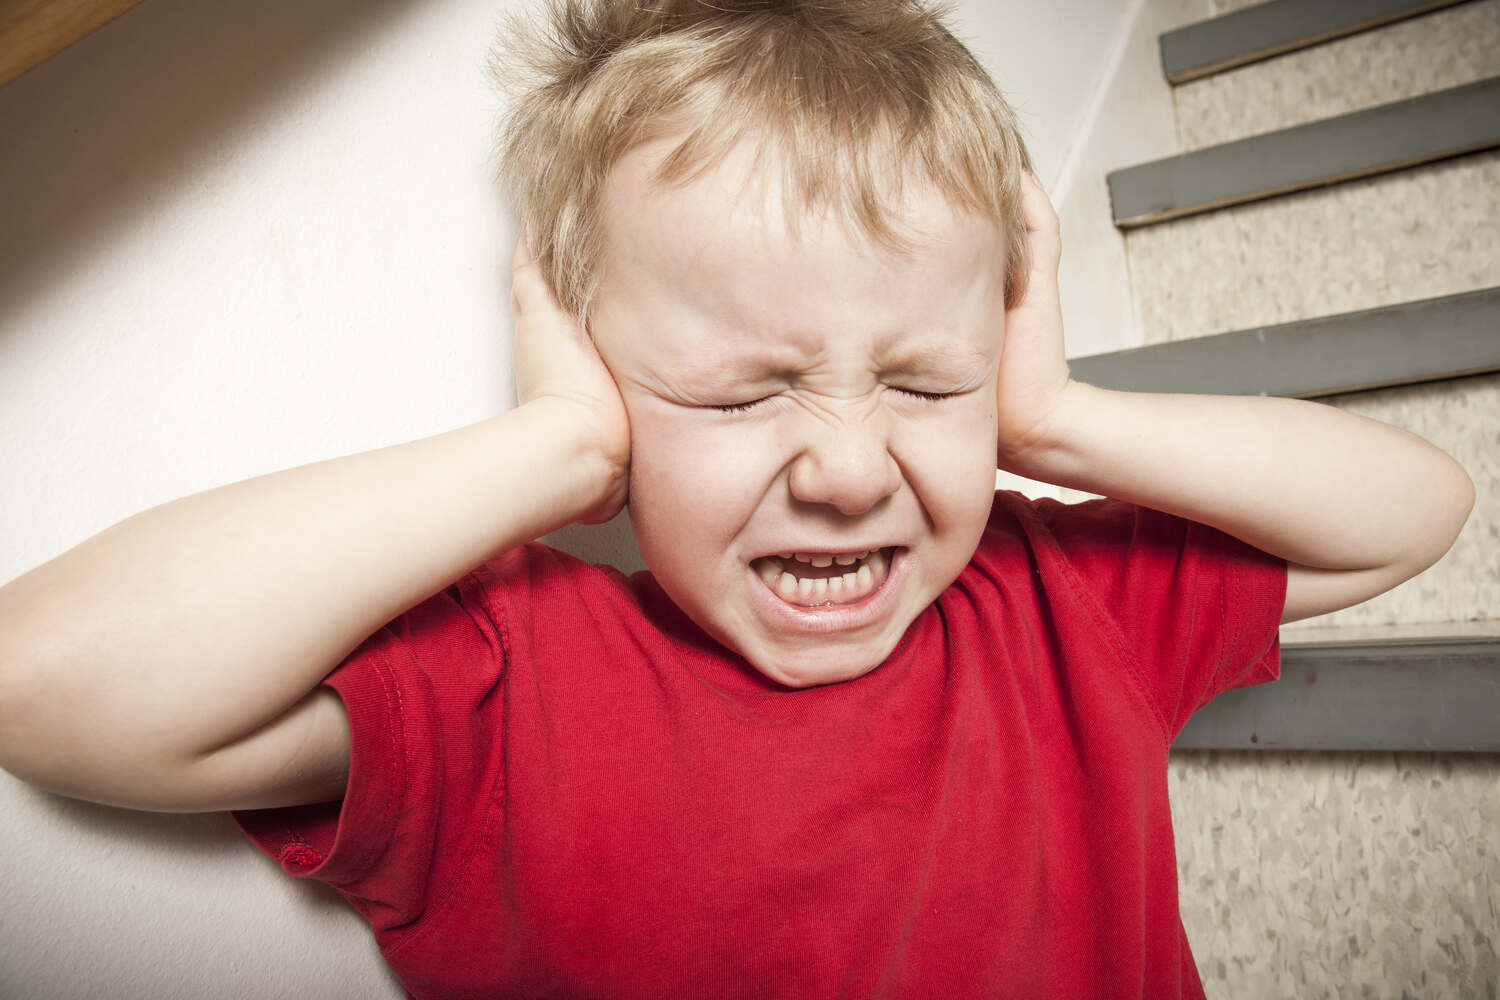 Hypersensitive kids feel uncomfortable to loud noises, bright lights, or strong aroma